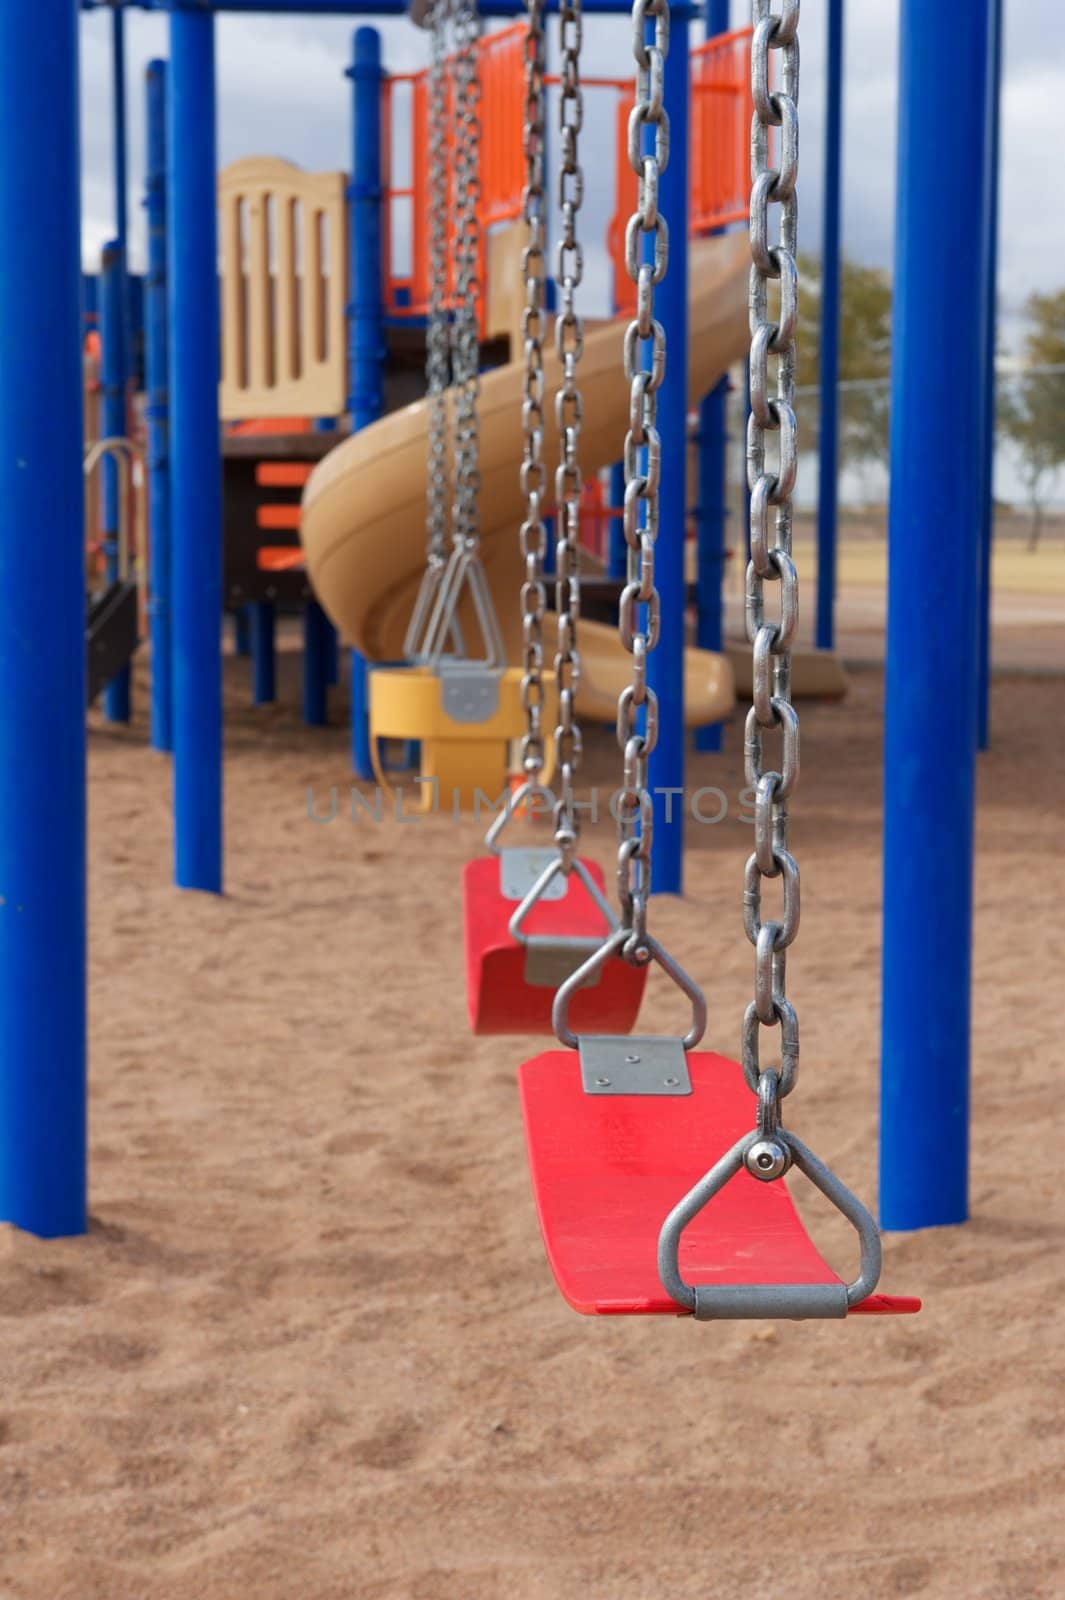 School or Park Playground Equipment with Swings by pixelsnap